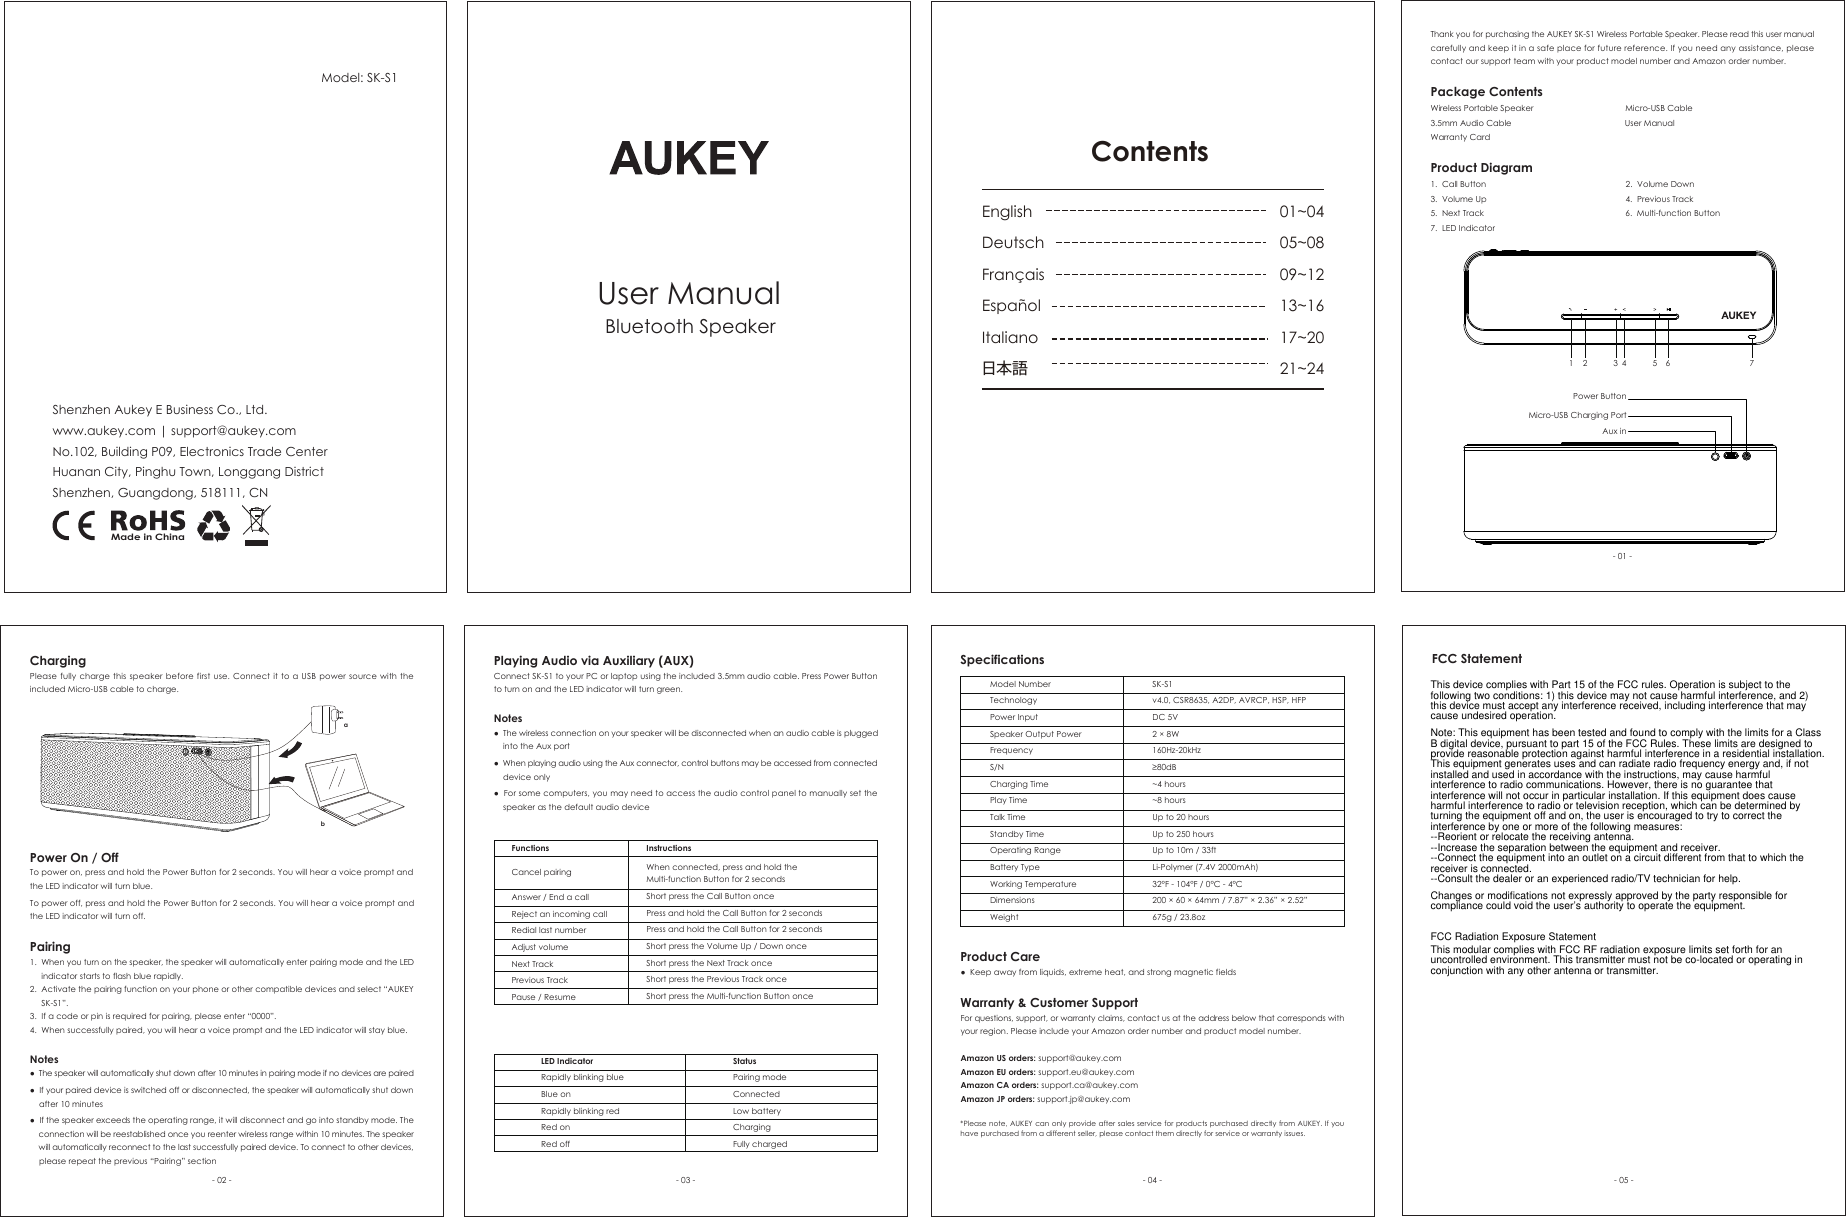 Thank you for purchasing the AUKEY SK-S1 Wireless Portable Speaker. Please read this user manual carefully and keep it in a safe place for future reference. If you need any assistance, please contact our support team with your product model number and Amazon order number.Package ContentsWireless Portable Speaker                                        Micro-USB Cable3.5mm Audio Cable                                                 User ManualWarranty CardProduct Diagram1.  Call Button                                                            2.  Volume Down3.  Volume Up                                                            4.  Previous Track5.  Next Track                                                             6.  Multi-function Button7.  LED IndicatorPower On / OffTo power on, press and hold the Power Button for 2 seconds. You will hear a voice prompt and the LED indicator will turn blue.To power off, press and hold the Power Button for 2 seconds. You will hear a voice prompt and the LED indicator will turn off. Pairing1.  When you turn on the speaker, the speaker will automatically enter pairing mode and the LED      indicator starts to flash blue rapidly.2.  Activate the pairing function on your phone or other compatible devices and select “AUKEY      SK-S1”.3.  If a code or pin is required for pairing, please enter “0000”.4.  When successfully paired, you will hear a voice prompt and the LED indicator will stay blue.Notes●  The speaker will automatically shut down after 10 minutes in pairing mode if no devices are paired●  If your paired device is switched off or disconnected, the speaker will automatically shut down     after 10 minutes●  If the speaker exceeds the operating range, it will disconnect and go into standby mode. The     connection will be reestablished once you reenter wireless range within 10 minutes. The speaker    will automatically reconnect to the last successfully paired device. To connect to other devices,    please repeat the previous “Pairing” sectionPlaying Audio via Auxiliary (AUX)Connect SK-S1 to your PC or laptop using the included 3.5mm audio cable. Press Power Button to turn on and the LED indicator will turn green.Notes●  The wireless connection on your speaker will be disconnected when an audio cable is plugged     into the Aux port●  When playing audio using the Aux connector, control buttons may be accessed from connected     device only●  For some computers, you may need to access the audio control panel to manually set the     speaker as the default audio deviceFunctionsCancel pairingAnswer / End a callReject an incoming callRedial last numberAdjust volumeNext TrackPrevious TrackPause / ResumeInstructionsWhen connected, press and hold the Multi-function Button for 2 secondsShort press the Call Button oncePress and hold the Call Button for 2 secondsPress and hold the Call Button for 2 secondsShort press the Volume Up / Down onceShort press the Next Track onceShort press the Previous Track onceShort press the Multi-function Button onceLED IndicatorRapidly blinking blueBlue onRapidly blinking redRed onRed offStatusPairing modeConnected Low batteryChargingFully chargedSpecificationsModel NumberTechnologyPower InputSpeaker Output PowerFrequencyS/NCharging TimePlay TimeTalk TimeStandby TimeOperating RangeBattery TypeWorking TemperatureDimensionsWeightSK-S1v4.0, CSR8635, A2DP, AVRCP, HSP, HFPDC 5V2 × 8W160Hz-20kHz≥80dB~4 hours~8 hoursUp to 20 hoursUp to 250 hoursUp to 10m / 33ftLi-Polymer (7.4V 2000mAh)32°F - 104°F / 0°C - 4°C200 × 60 × 64mm / 7.87” × 2.36” × 2.52”675g / 23.8ozProduct Care●  Keep away from liquids, extreme heat, and strong magnetic fieldsWarranty &amp; Customer Support For questions, support, or warranty claims, contact us at the address below that corresponds with your region. Please include your Amazon order number and product model number. Amazon US orders: support@aukey.com Amazon EU orders: support.eu@aukey.com Amazon CA orders: support.ca@aukey.com Amazon JP orders: support.jp@aukey.com*Please note, AUKEY can only provide after sales service for products purchased directly from AUKEY. If you have purchased from a different seller, please contact them directly for service or warranty issues.- 01 -- 02 - - 03 - - 04 -User ManualBluetooth SpeakerShenzhen Aukey E Business Co., Ltd.www.aukey.com | support@aukey.comNo.102, Building P09, Electronics Trade CenterHuanan City, Pinghu Town, Longgang DistrictShenzhen, Guangdong, 518111, CNModel: SK-S1Made in ChinaChargingPlease fully charge this speaker before first use. Connect it to a USB power source with the included Micro-USB cable to charge.Aux inMicro-USB Charging PortPower Button1 2 3 4 5 6 7ContentsEnglishDeutschFrançais EspañolItaliano日本語01~0405~0809~1213~1617~2021~24abFCC Statement- 05 -This device complies with Part 15 of the FCC rules. Operation is subject to the following two conditions: 1) this device may not cause harmful interference, and 2) this device must accept any interference received, including interference that may cause undesired operation.Note: This equipment has been tested and found to comply with the limits for a ClassB digital device, pursuant to part 15 of the FCC Rules. These limits are designed toprovide reasonable protection against harmful interference in a residential installation.This equipment generates uses and can radiate radio frequency energy and, if not installed and used in accordance with the instructions, may cause harmful interference to radio communications. However, there is no guarantee that interference will not occur in particular installation. If this equipment does cause harmful interference to radio or television reception, which can be determined by turning the equipment off and on, the user is encouraged to try to correct the interference by one or more of the following measures:--Reorient or relocate the receiving antenna.--Increase the separation between the equipment and receiver.--Connect the equipment into an outlet on a circuit different from that to which the receiver is connected.--Consult the dealer or an experienced radio/TV technician for help.Changes or modifications not expressly approved by the party responsible for compliance could void the user’s authority to operate the equipment.FCC Radiation Exposure StatementThis modular complies with FCC RF radiation exposure limits set forth for an uncontrolled environment. This transmitter must not be co-located or operating in conjunction with any other antenna or transmitter.